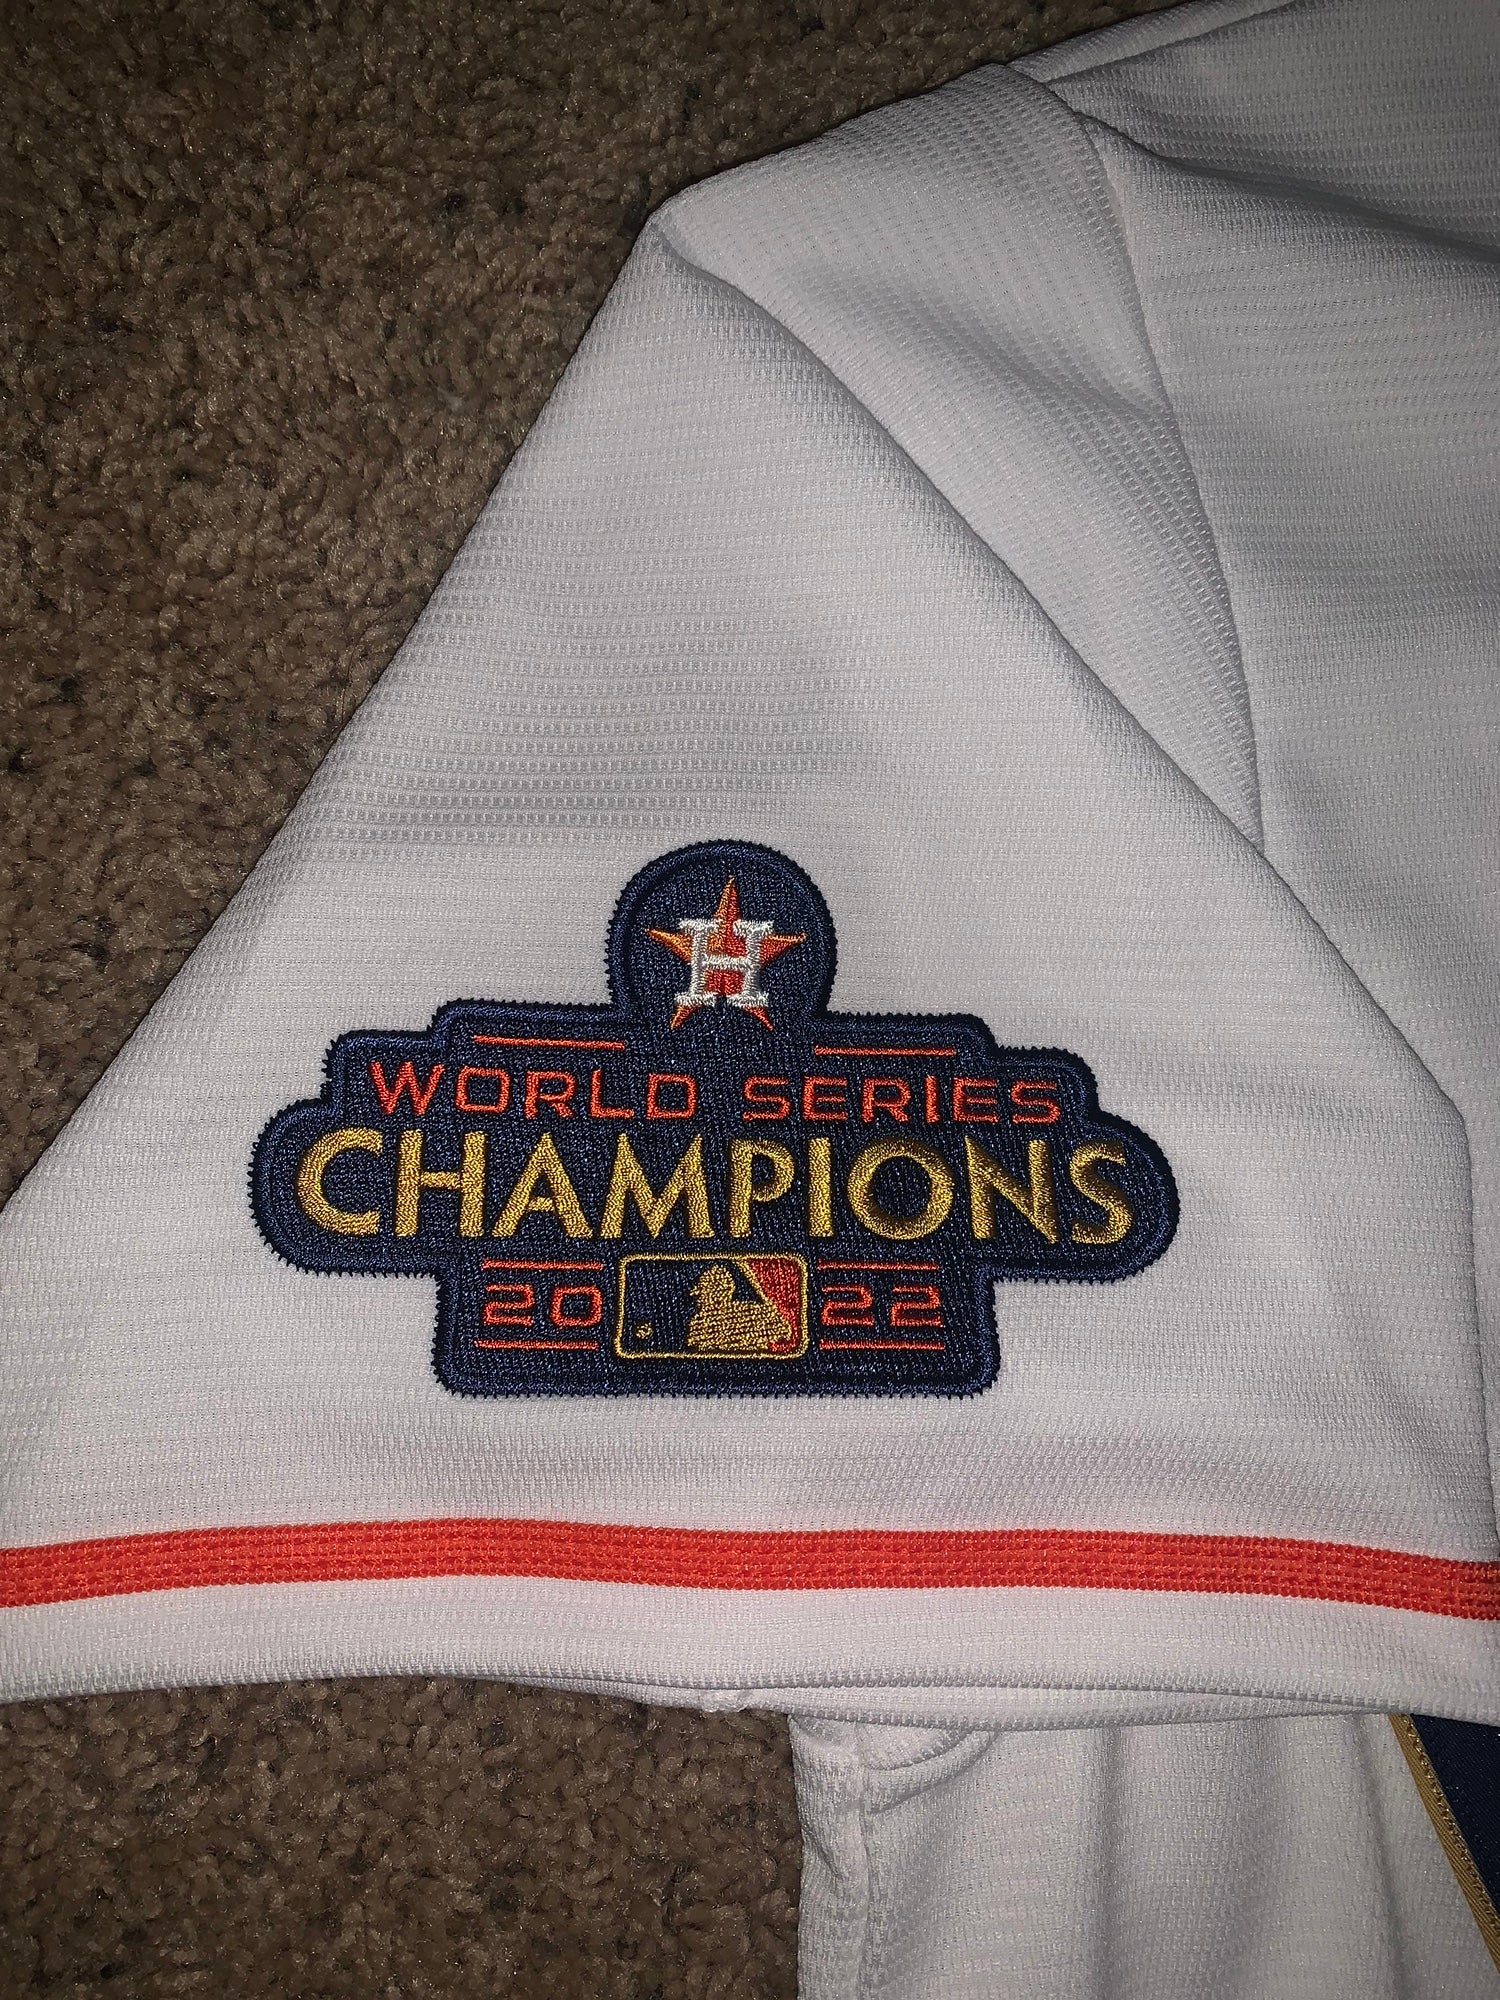 2008 Chase Utley World Series Champs Philadelphia Phillies Majestic MLB  Jersey Size Youth Size Large – Rare VNTG